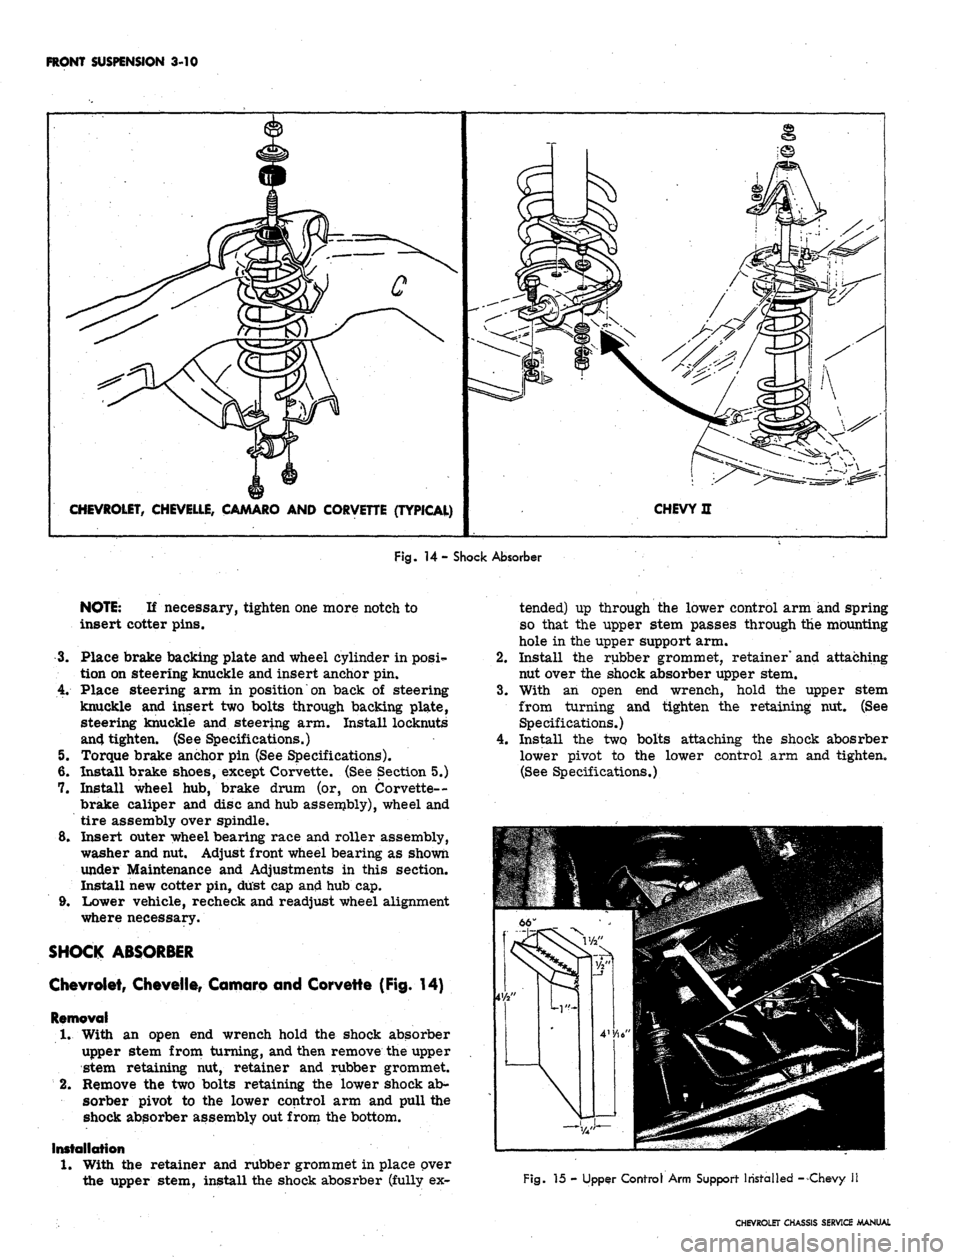 CHEVROLET CAMARO 1967 1.G Chassis Workshop Manual 
FRONT SUSPENSION 3-10

CHEVROLET, CHEVELLE, CAMARO AND CORVETTE (TYPICAL) 
CHEVY H

Fig.
 14- Shock Absorber

NOTE:
 If necessary, tighten one more notch to

insert cotter pins.

3.
 Place brake back